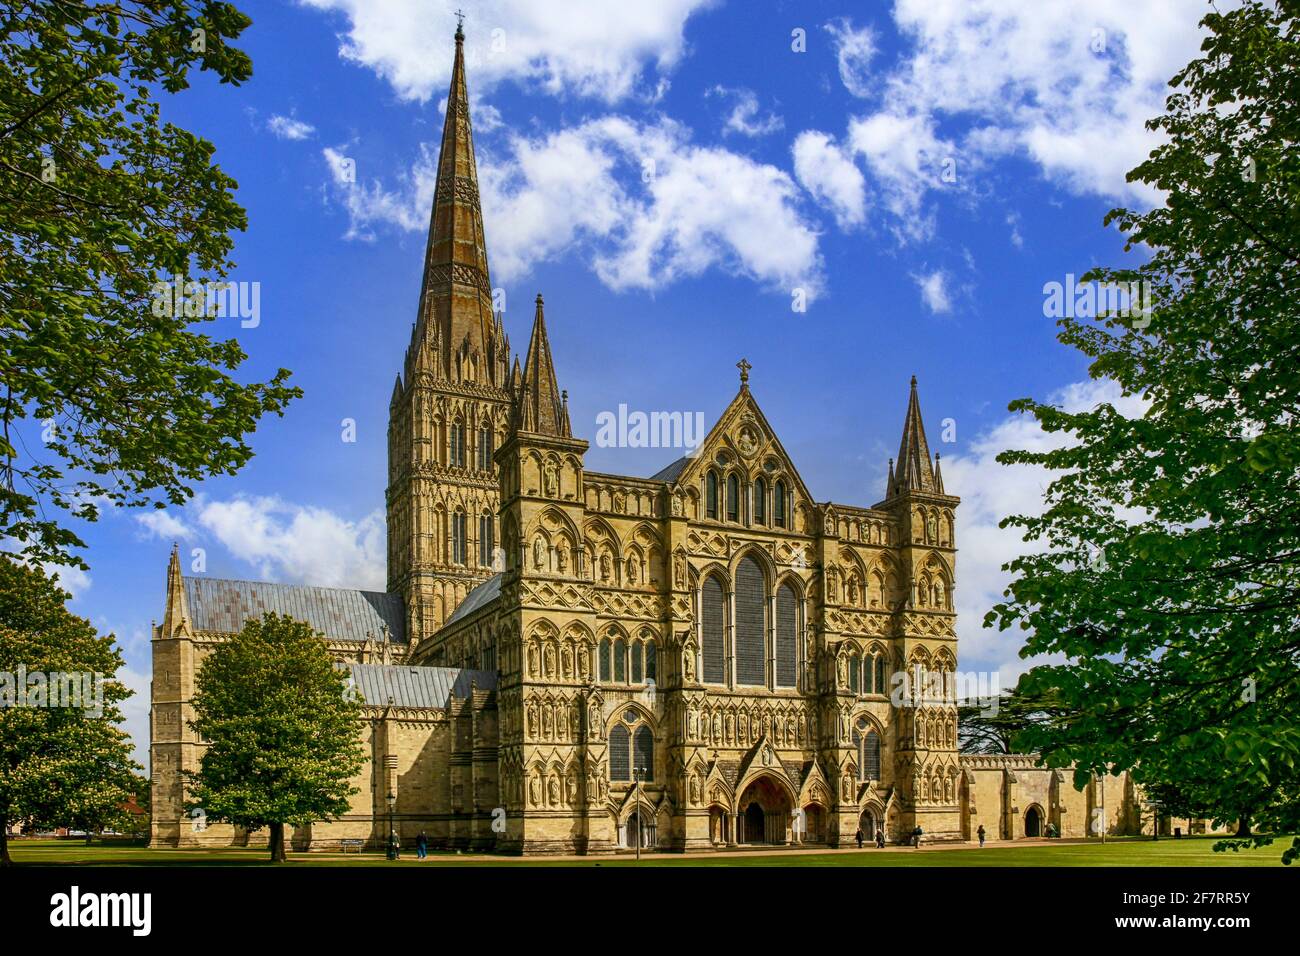 A view of Salisbury Cathedral in Wiltshire England Stock Photo